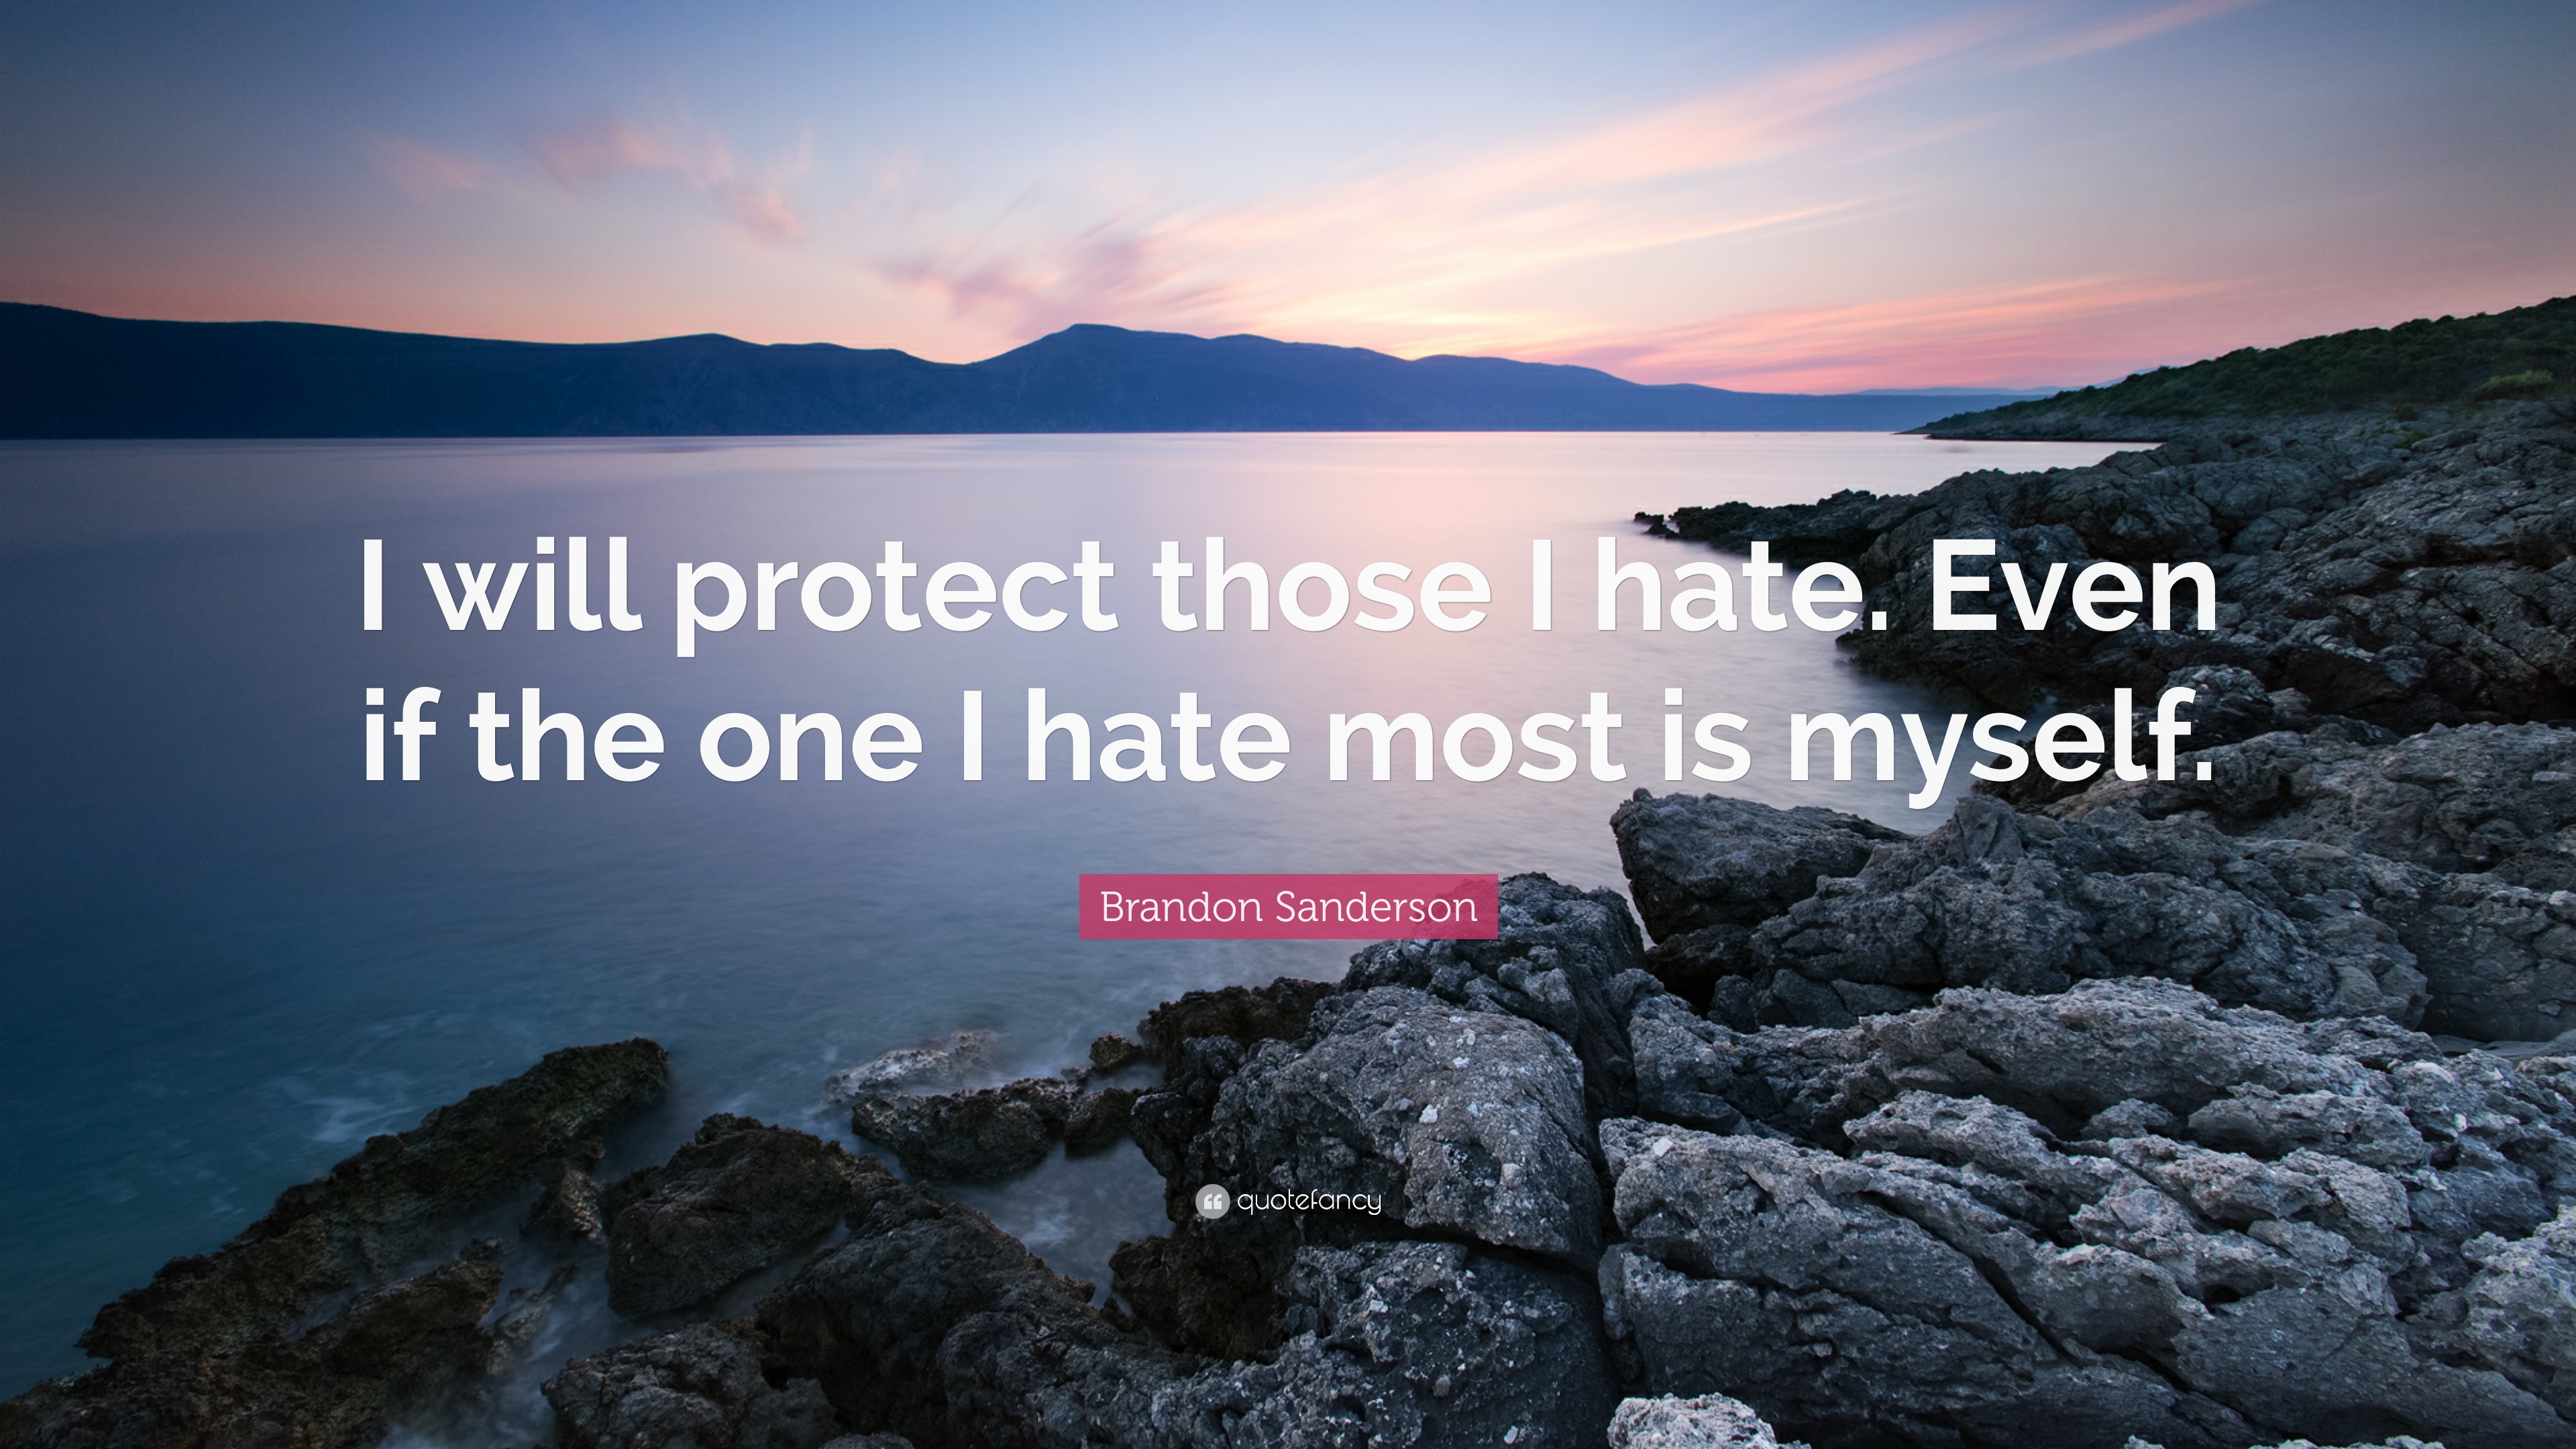 https://quotefancy.com/media/wallpaper/3840x2160/6396220-Brandon-Sanderson-Quote-I-will-protect-those-I-hate-Even-if-the.jpg